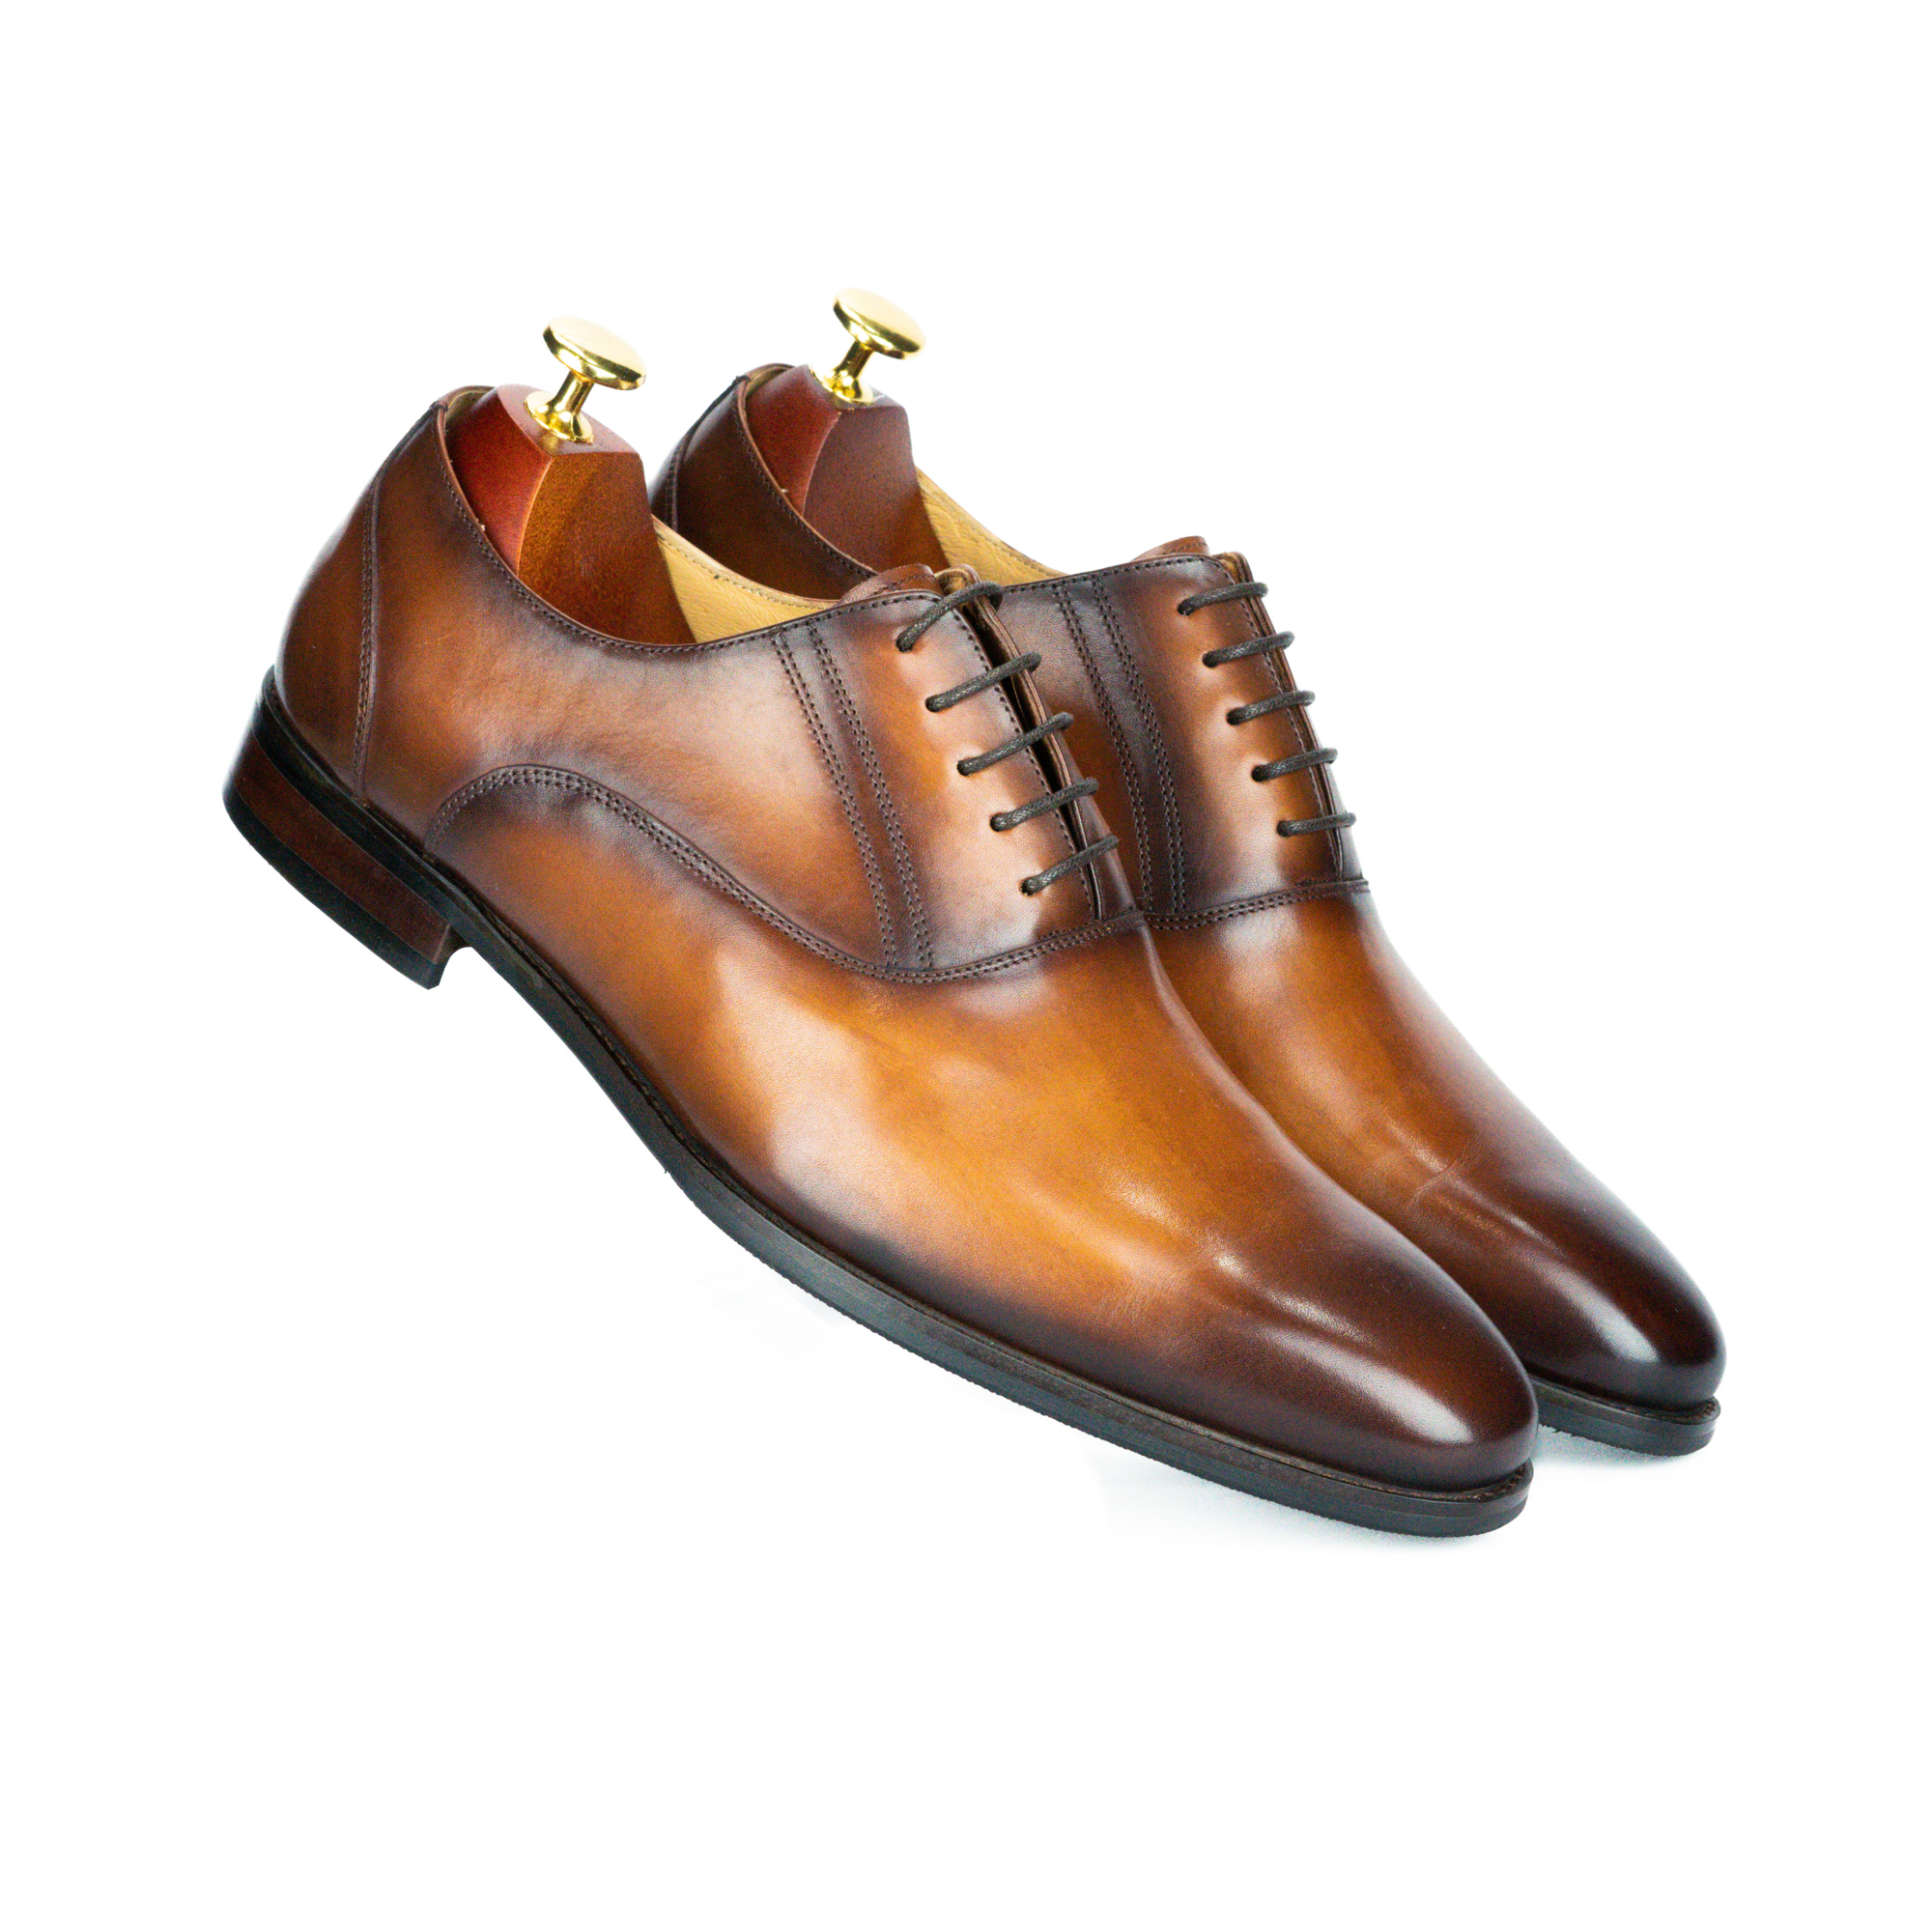 Knightsman House Oxford | Handmade Classic Men's Leather Shoes in Tan